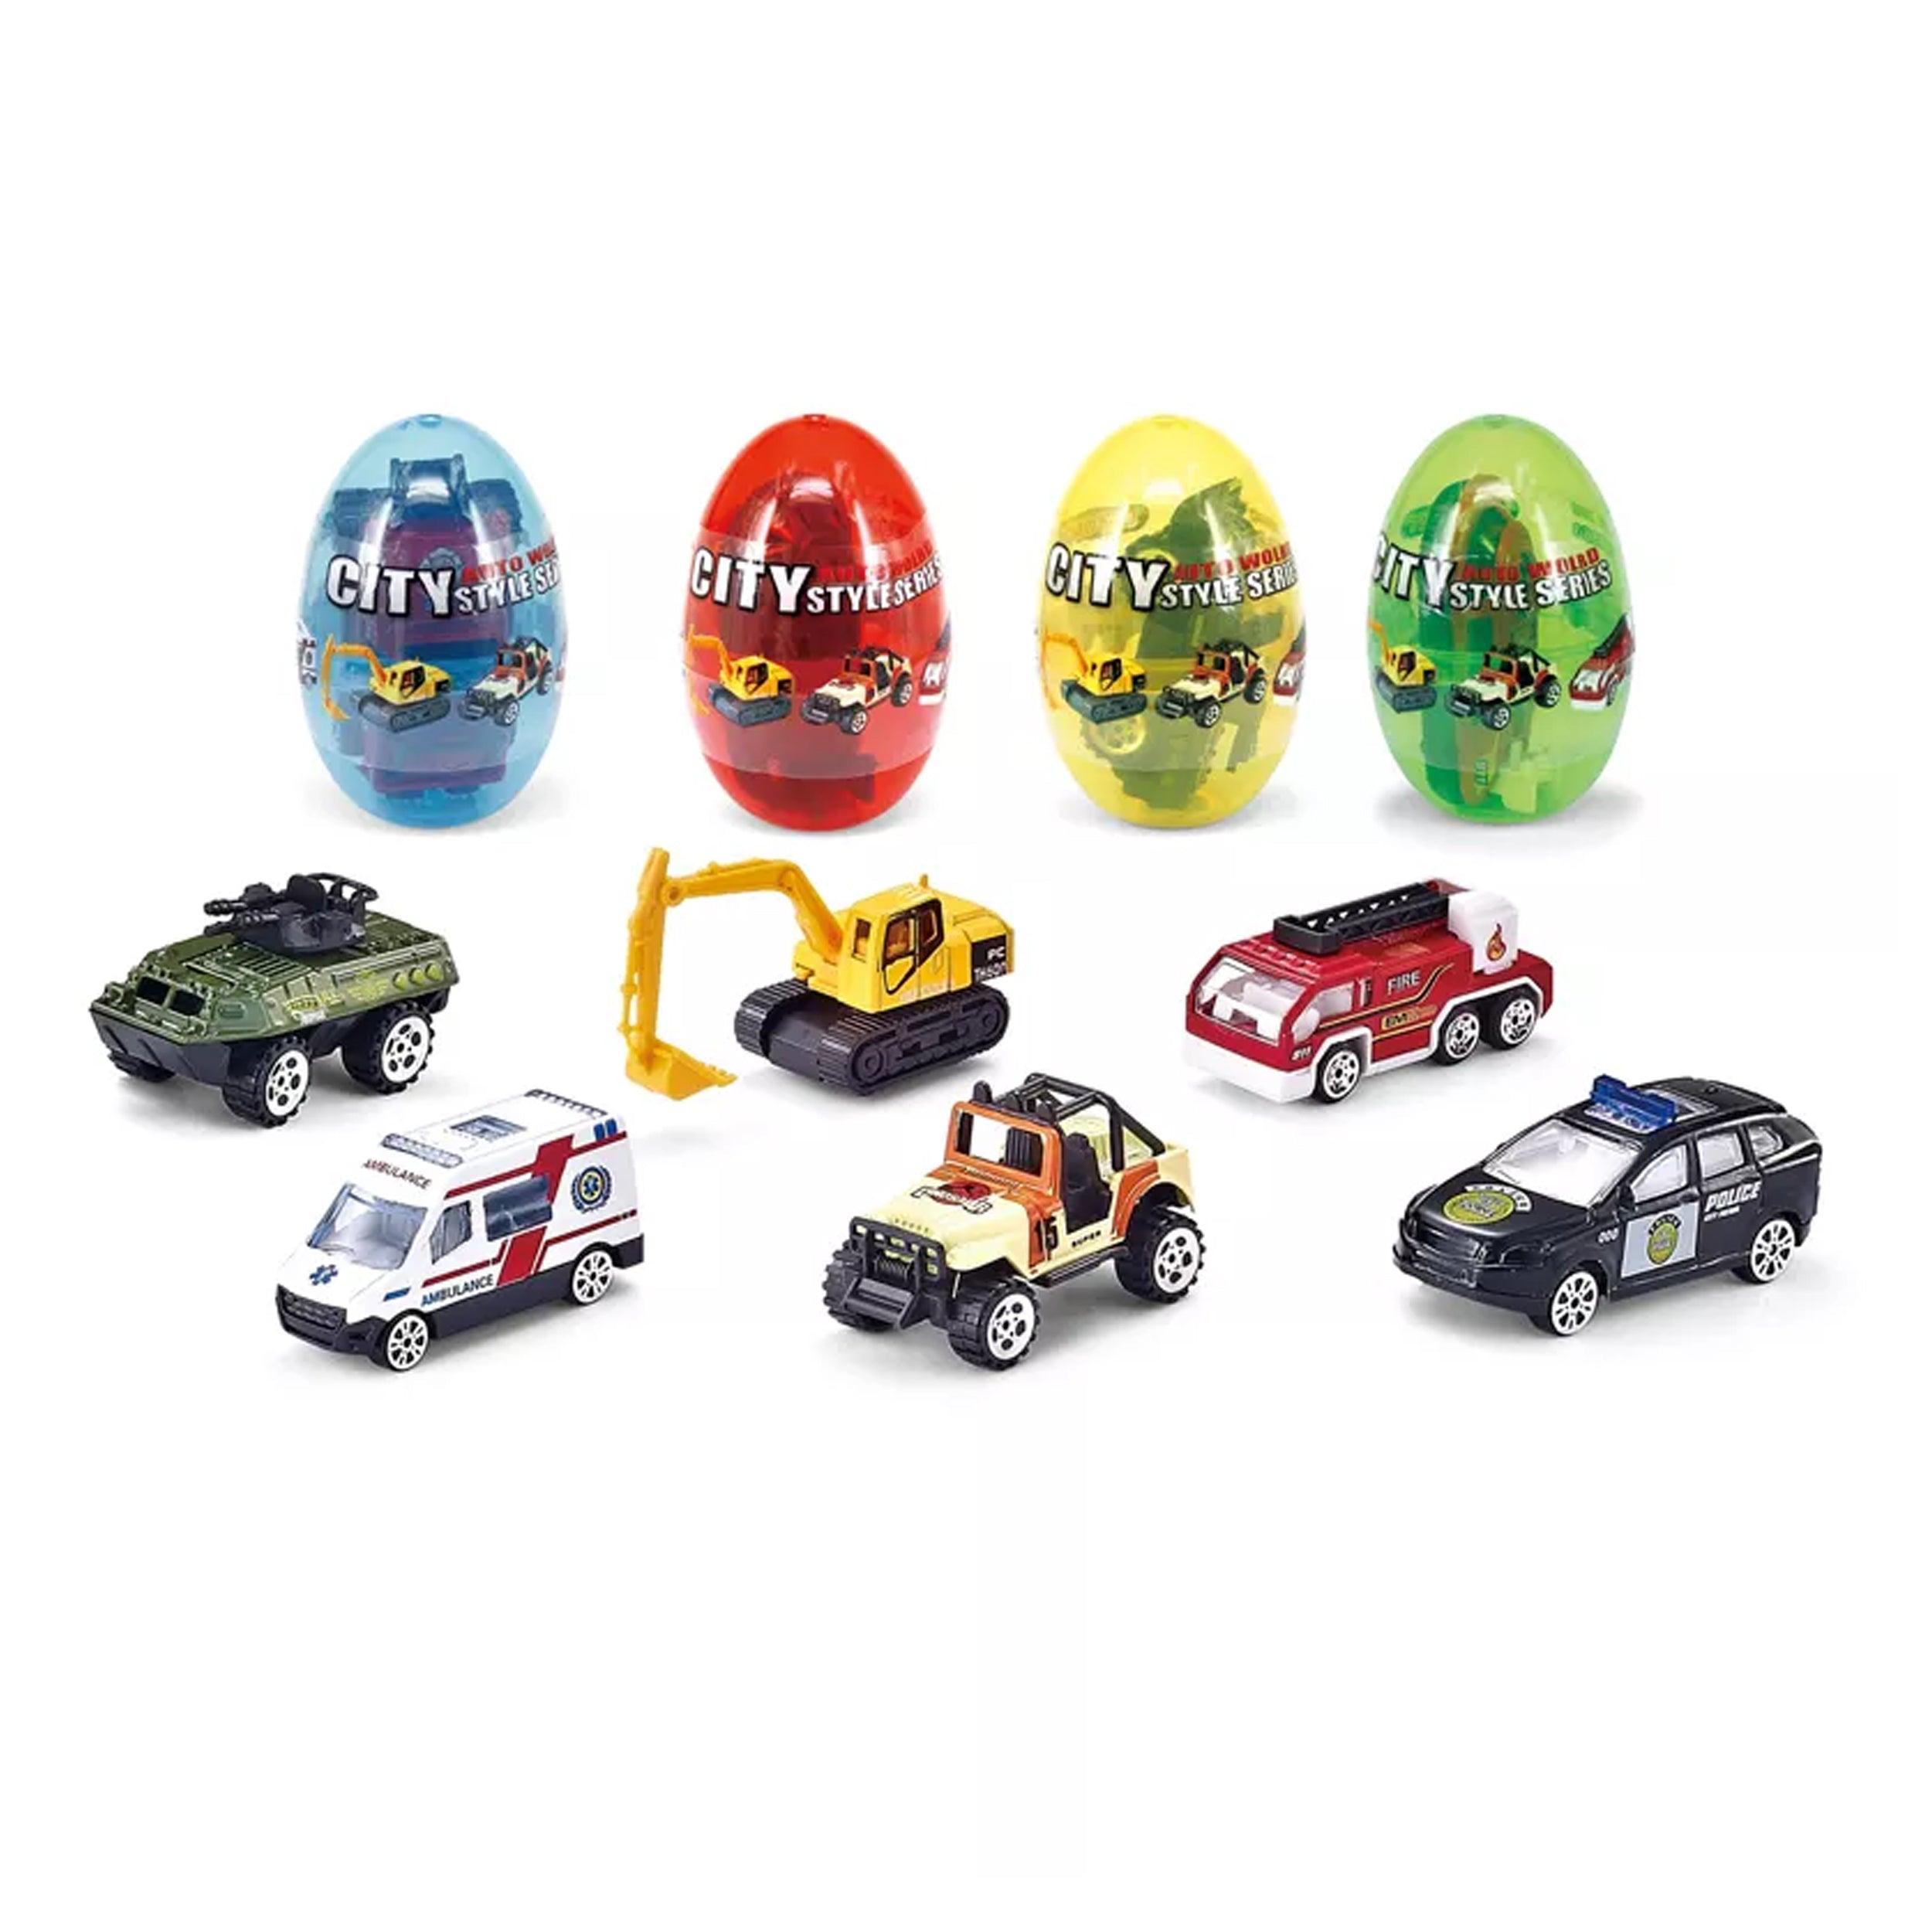 Pull Back Metal Diecast Racing Vehicle Car Toys - Perfect for Playtime and Collecting